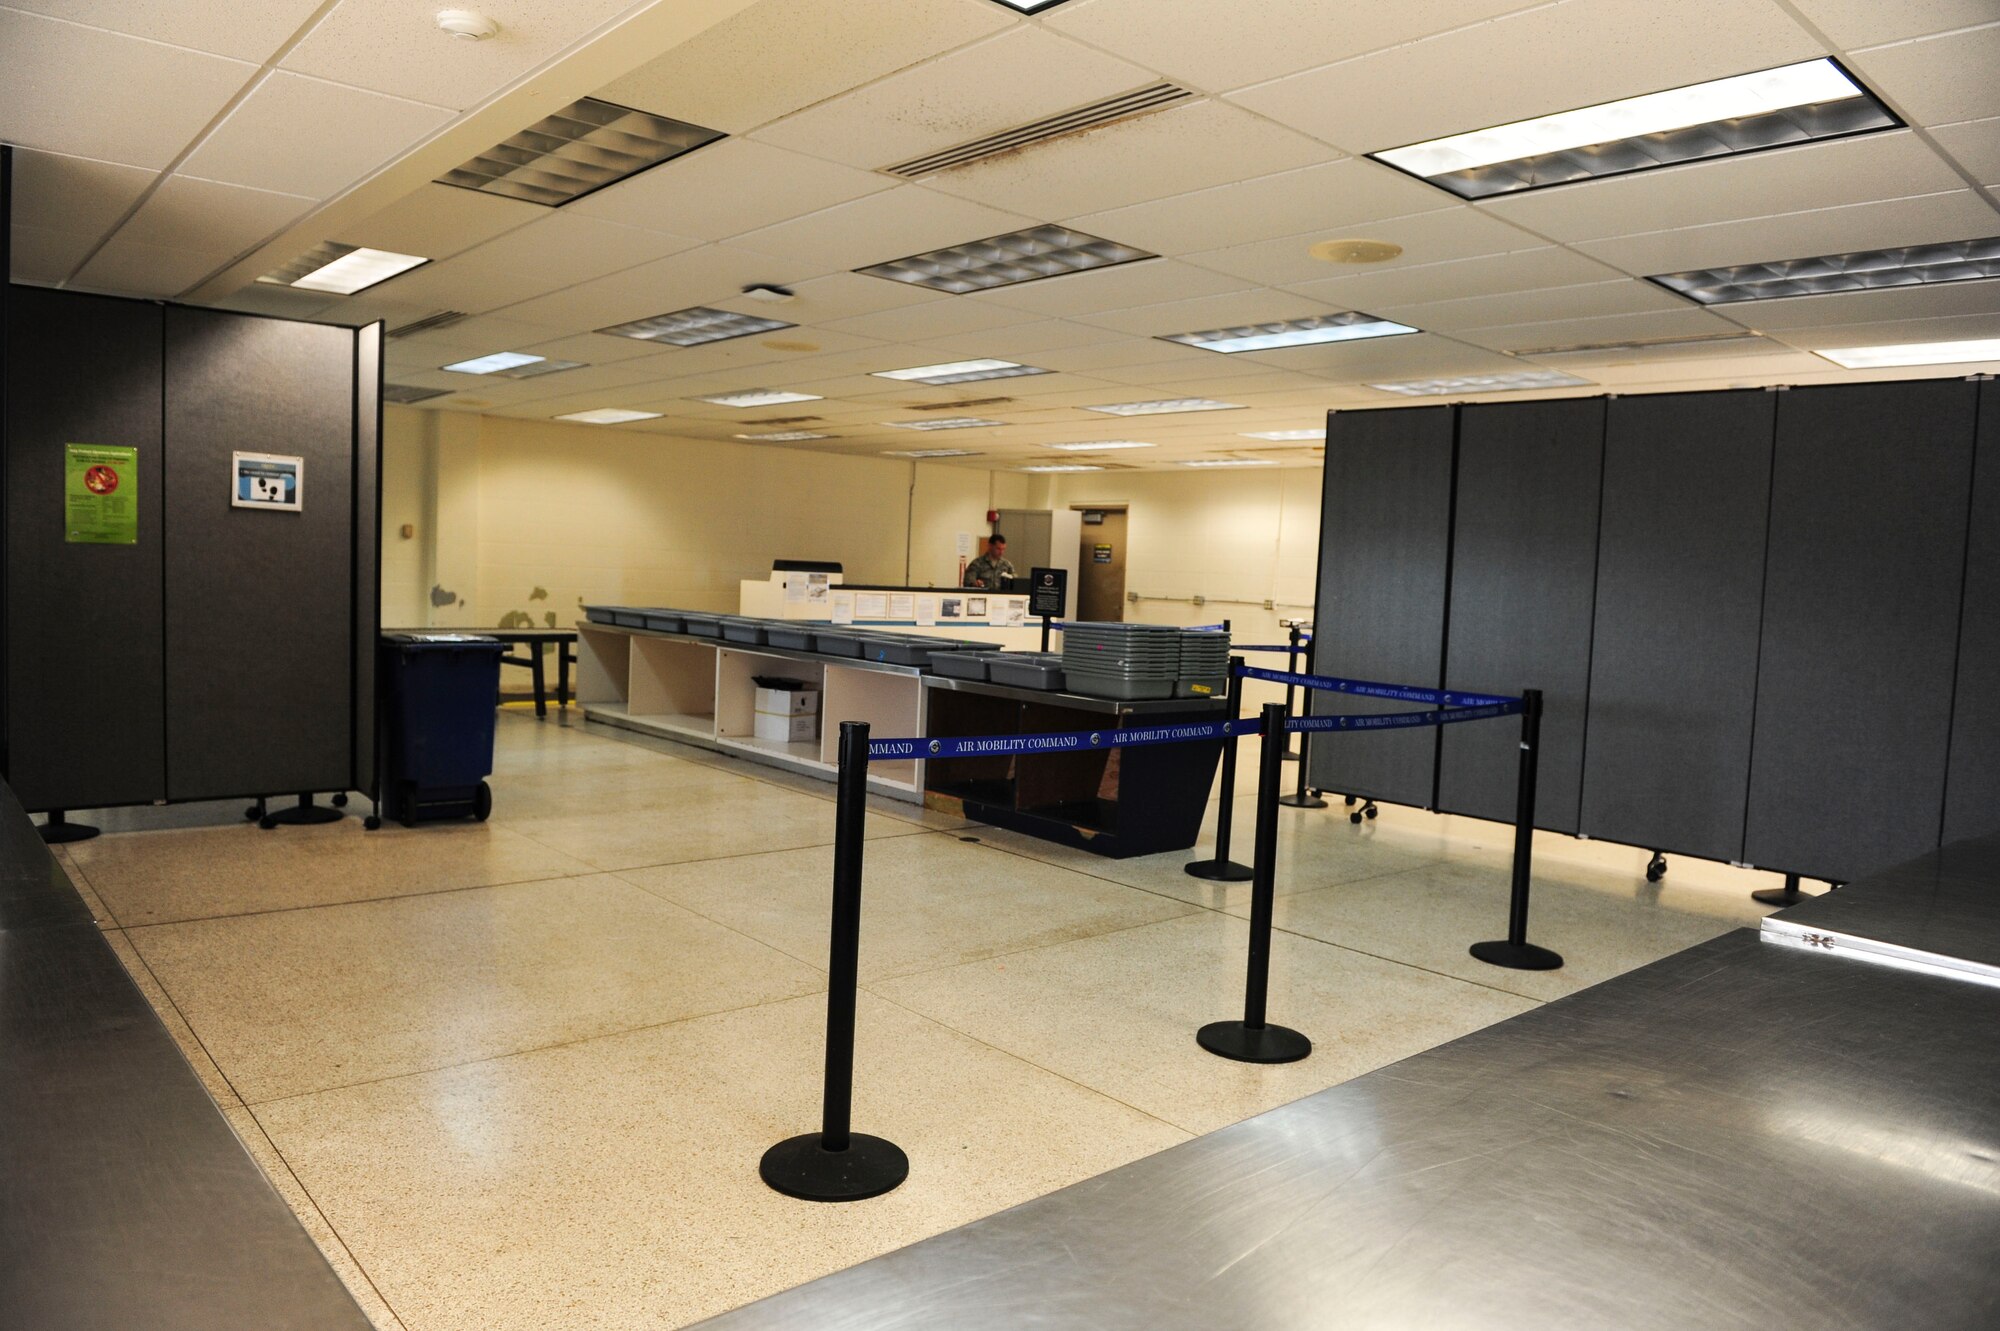 The 735th Air Mobility Squadron Space Available (Space-A) Passenger Terminal's security check point is currently operational, Hickam Field, May 22, 2017. Air Mobility Command’s Space-A Passenger Terminal on Joint Base Pearl Harbor-Hickam, Hawaii, entered Phase II of its renovation plan.  Phase II involves the shutdown of the main concourse with services operating out of temporary tents. Anticipated completion of the $20.5 million dollar infrastructure project is set for Spring 2018. (U.S. Air Force photo by Tech. Sgt. Heather Redman)